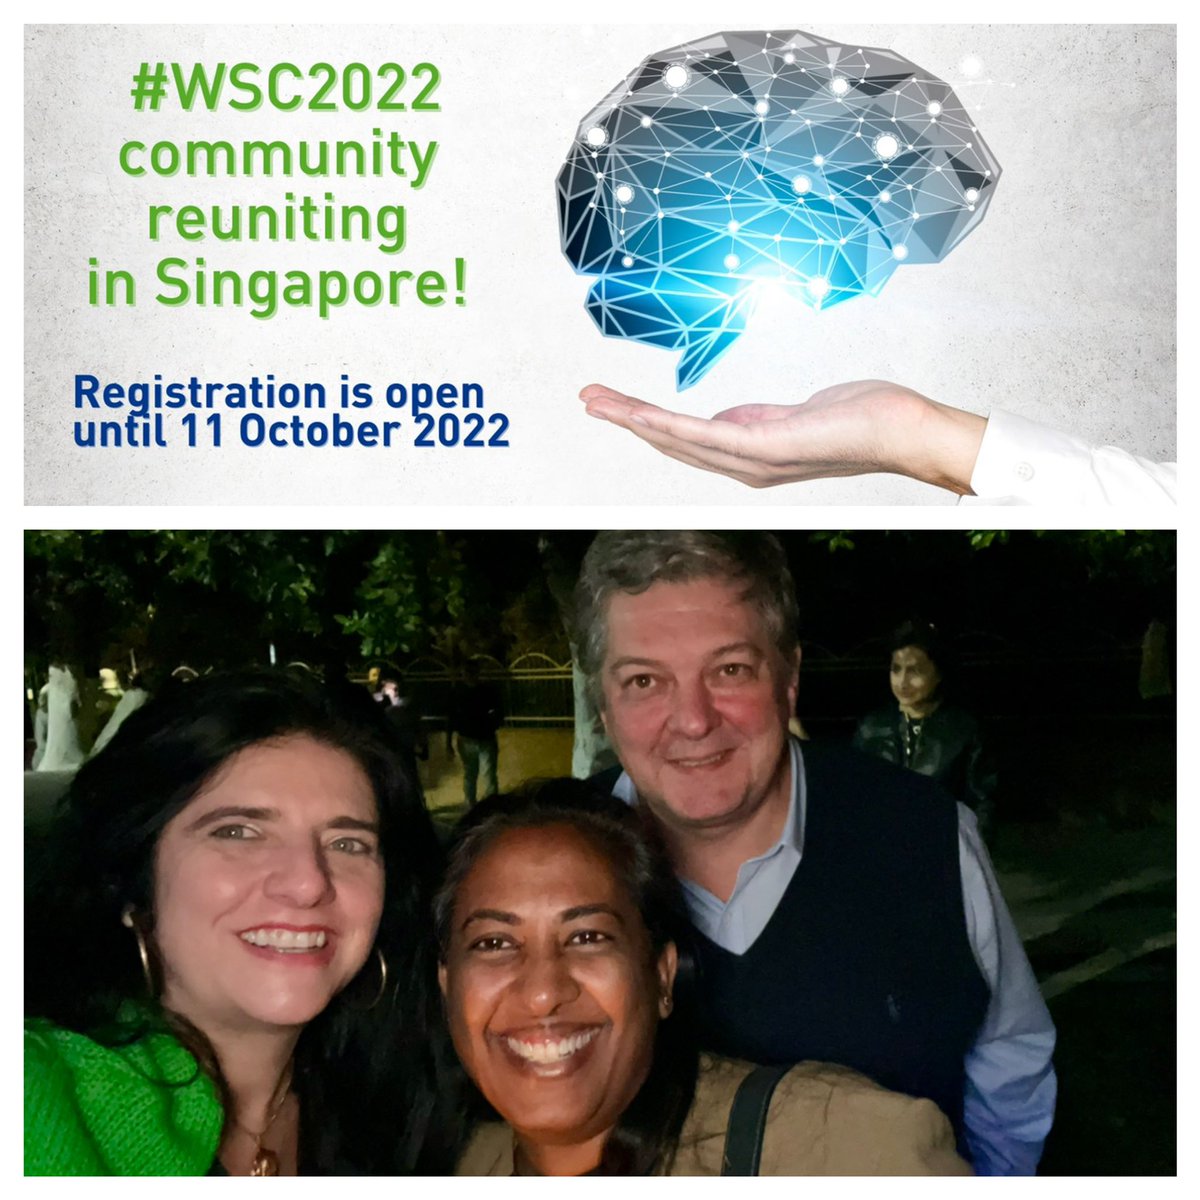 Join us at the World Stroke Congress in Singapore! See you there #WSC2022